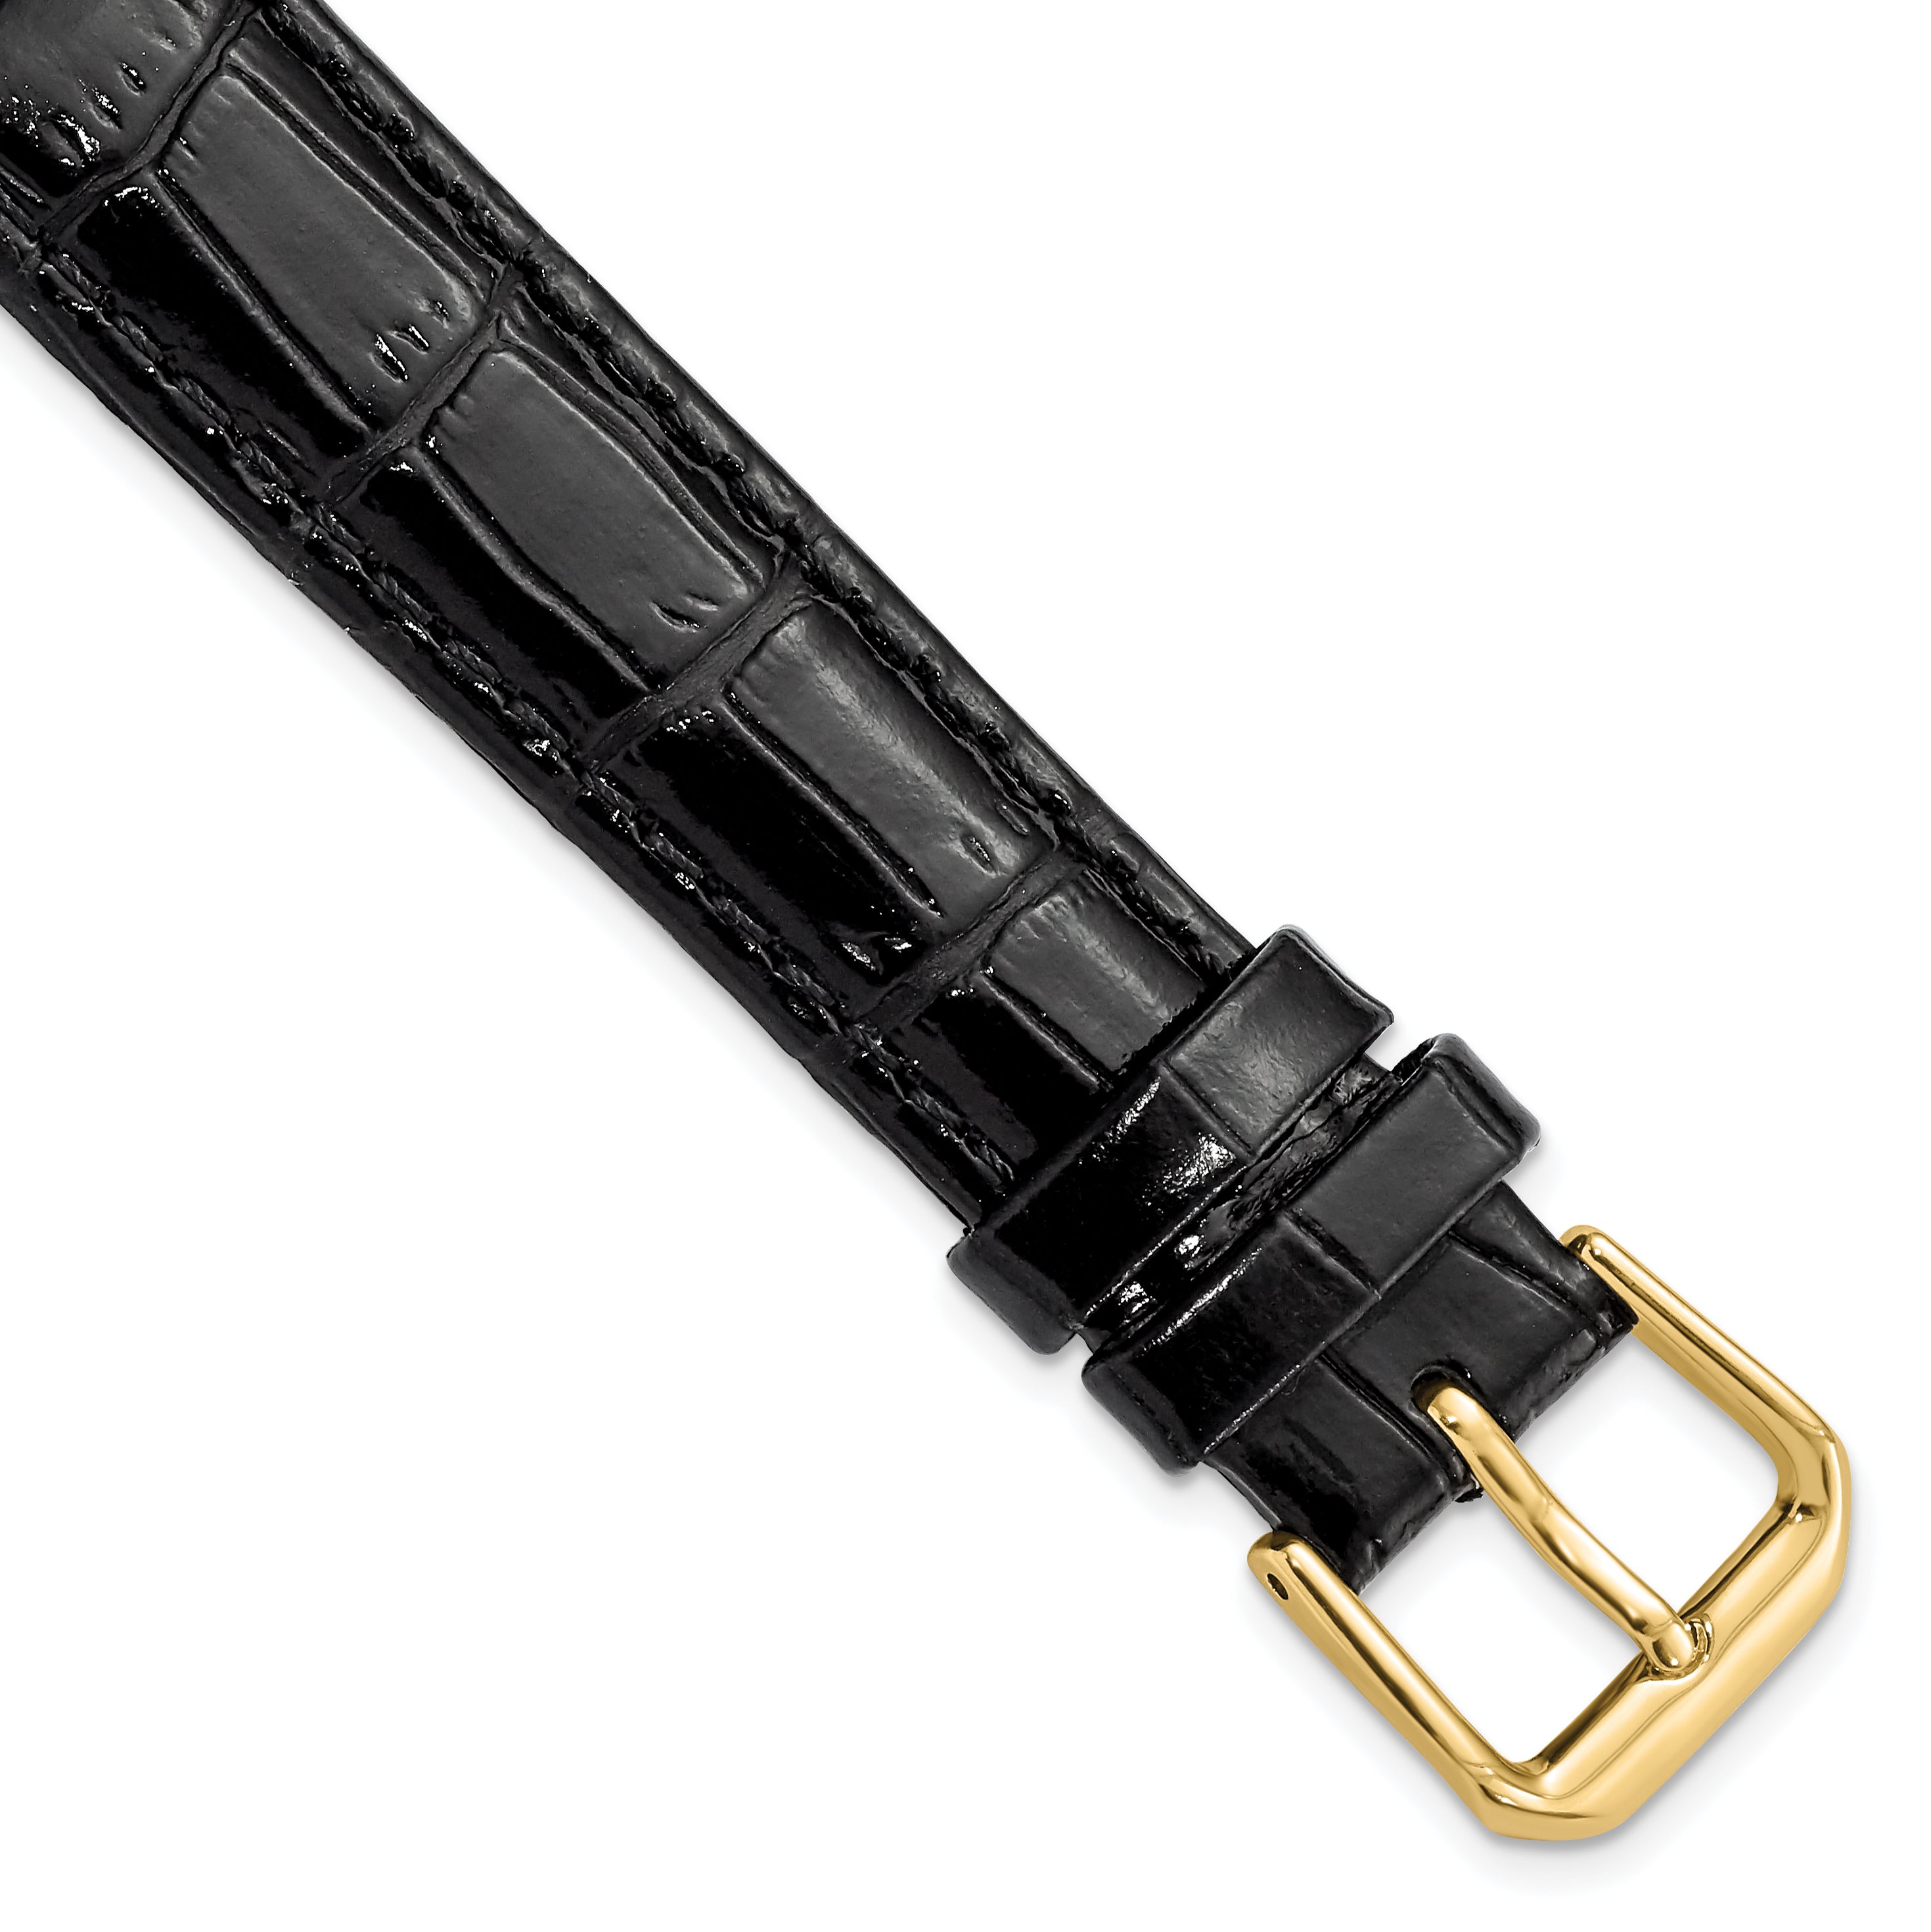 DeBeer 16mm Black Crocodile Grain Leather with Dark Stitching and Gold-tone Buckle 7.5 inch Watch Band